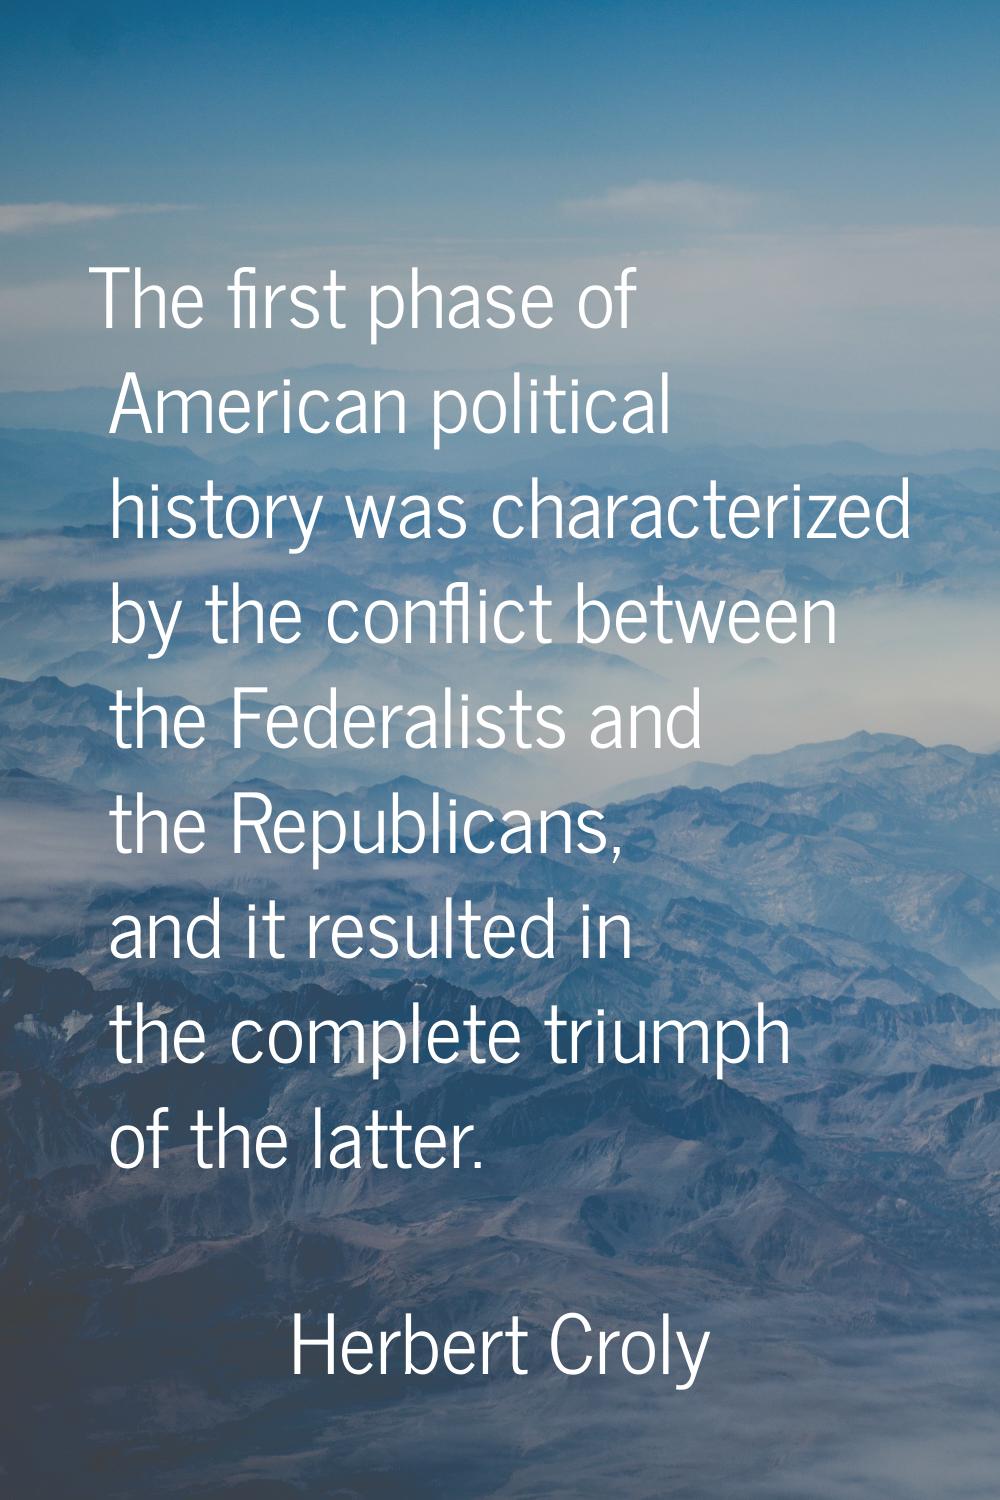 The first phase of American political history was characterized by the conflict between the Federal